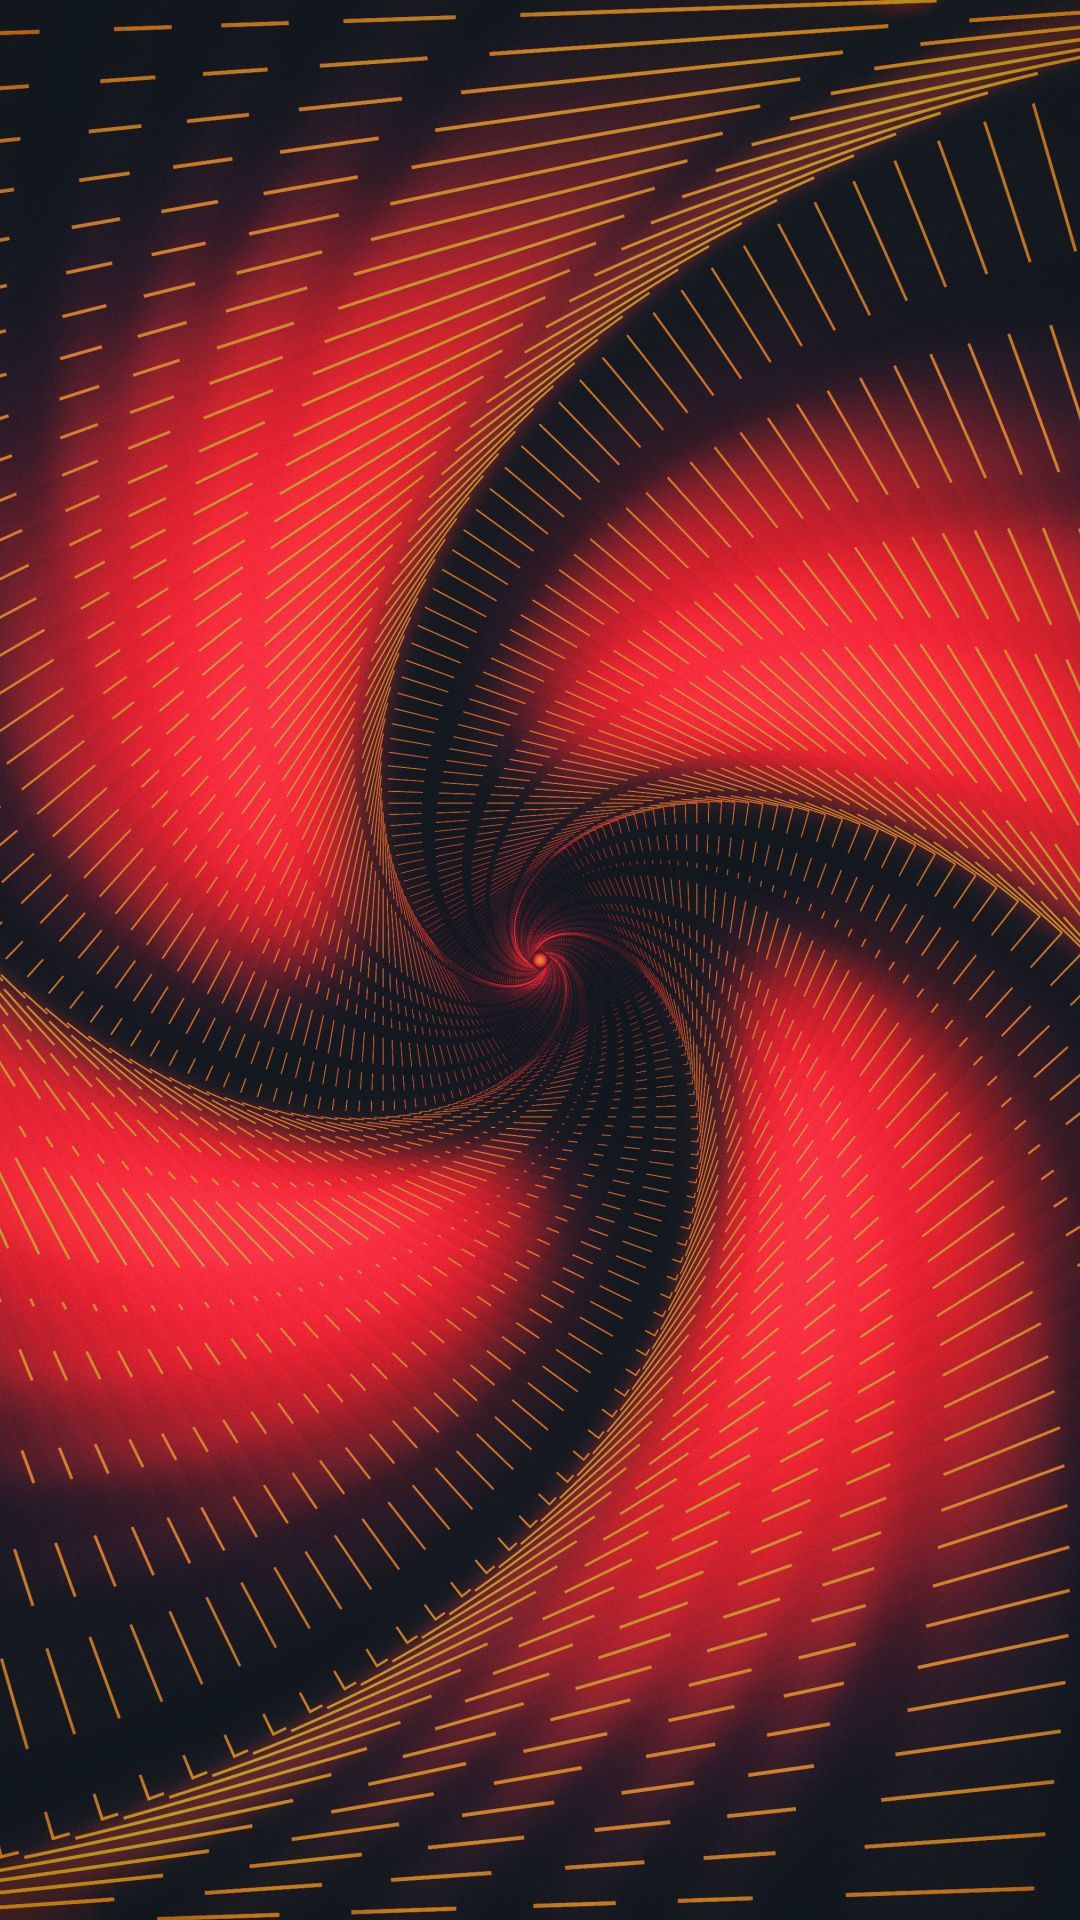 3D swirl, pattern, abstract, spiral wallpaper. Abstract